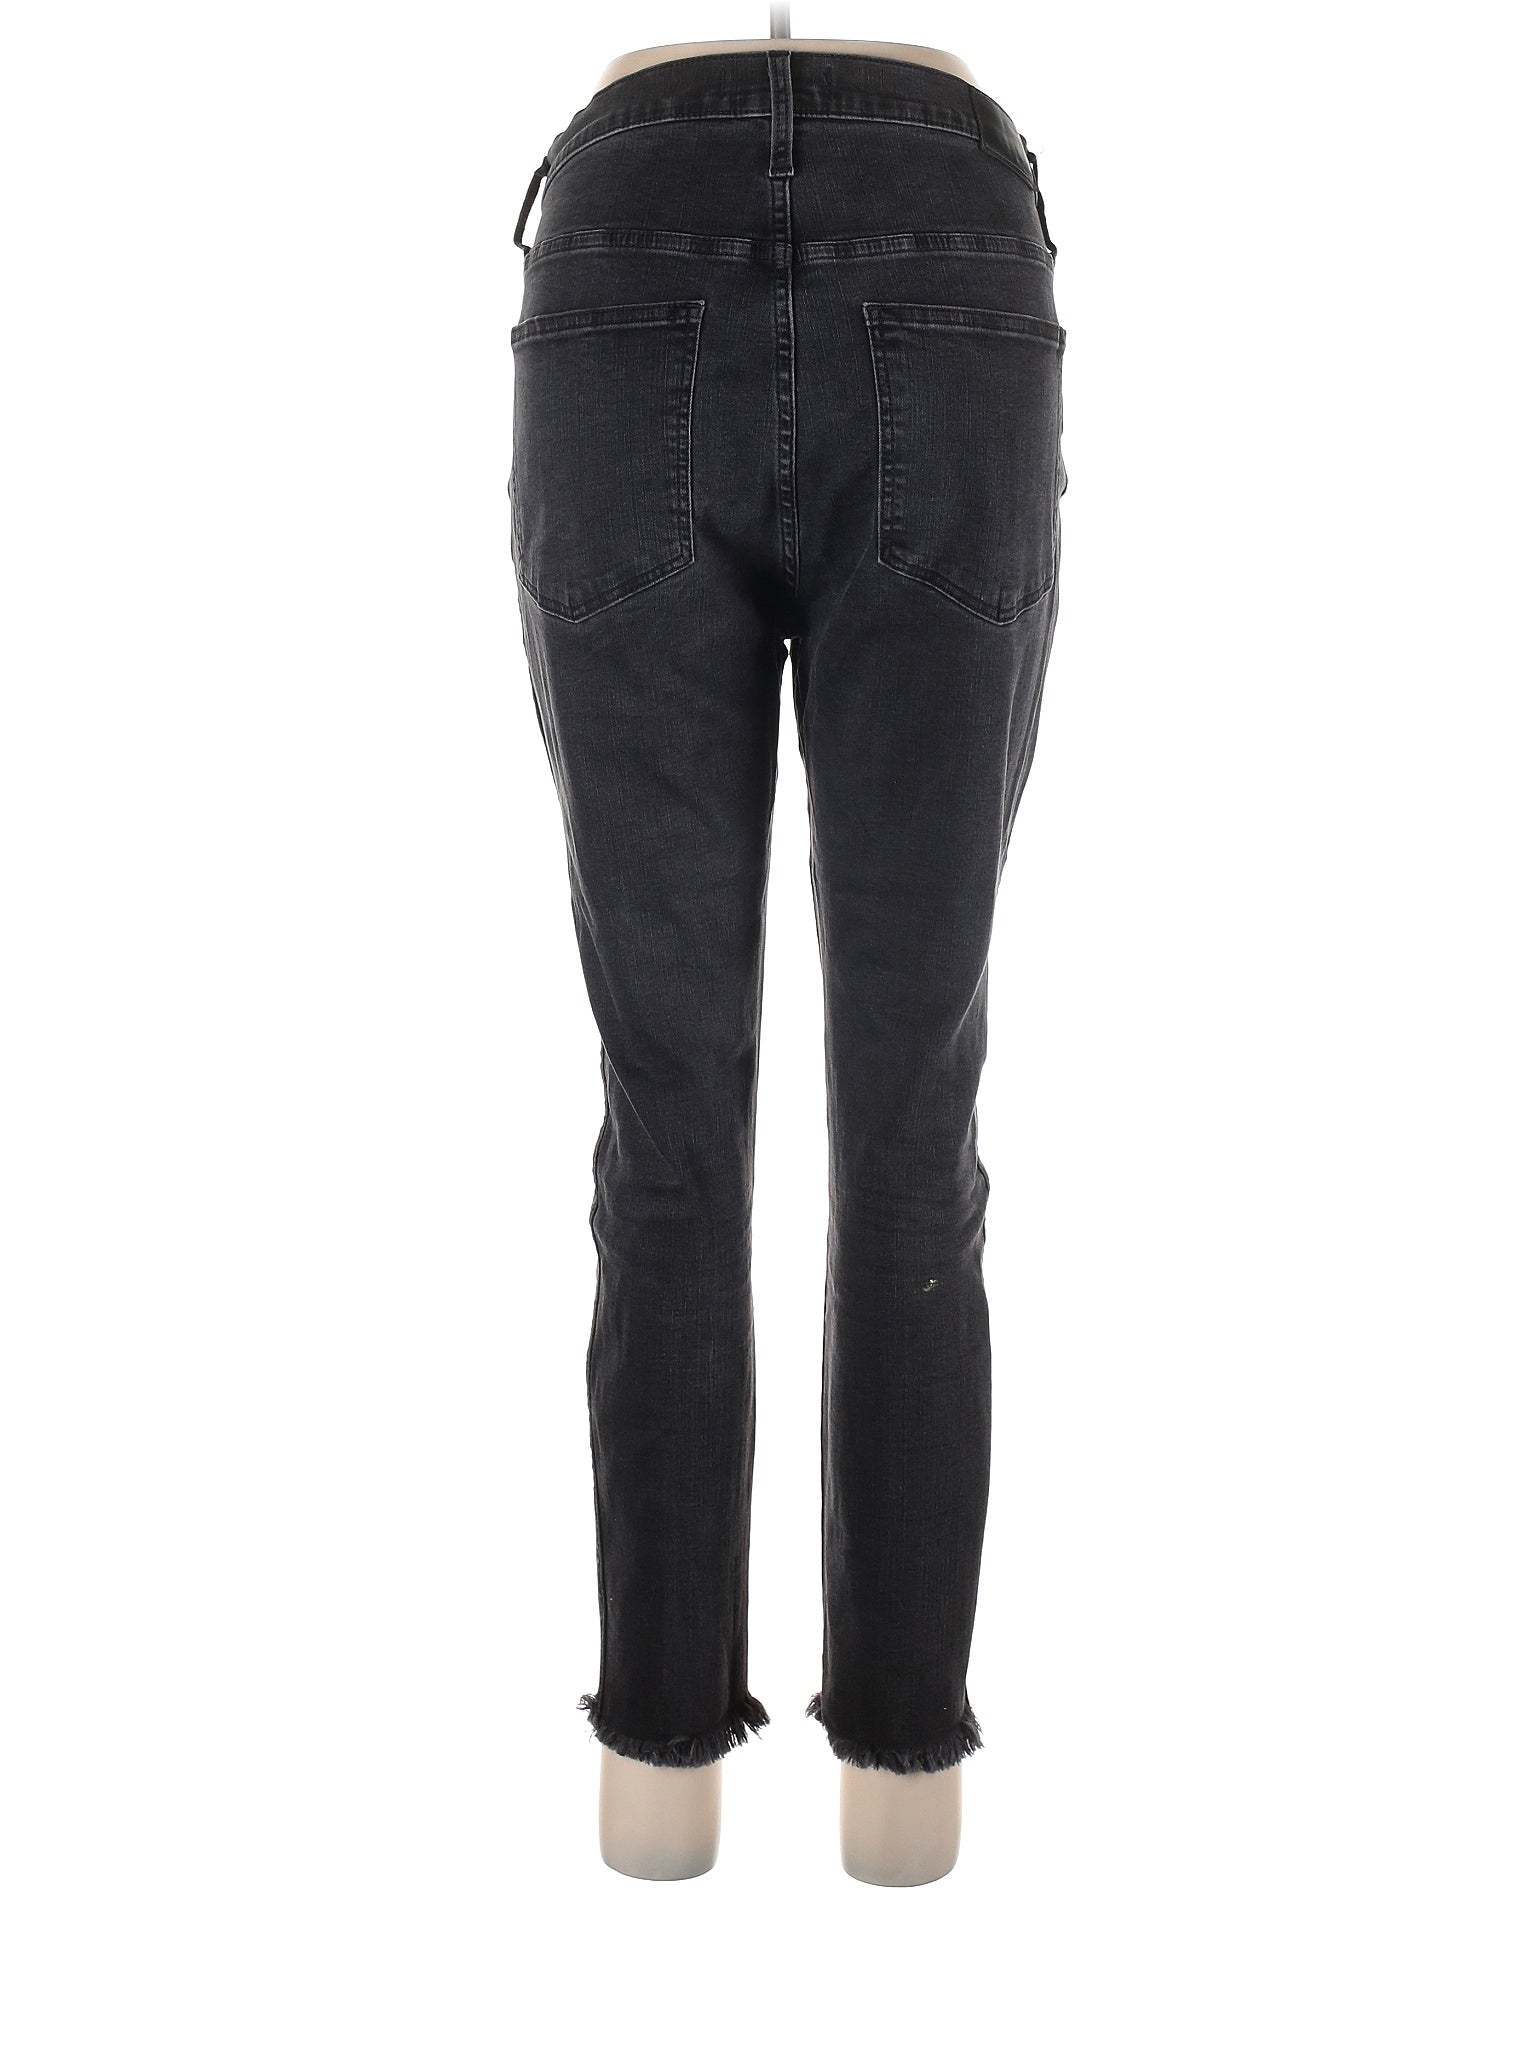 High-Rise Skinny Petite 10" High-Rise Skinny Jeans In Berkeley Black: Button-Through Edition in Dark Wash waist size - 31 P